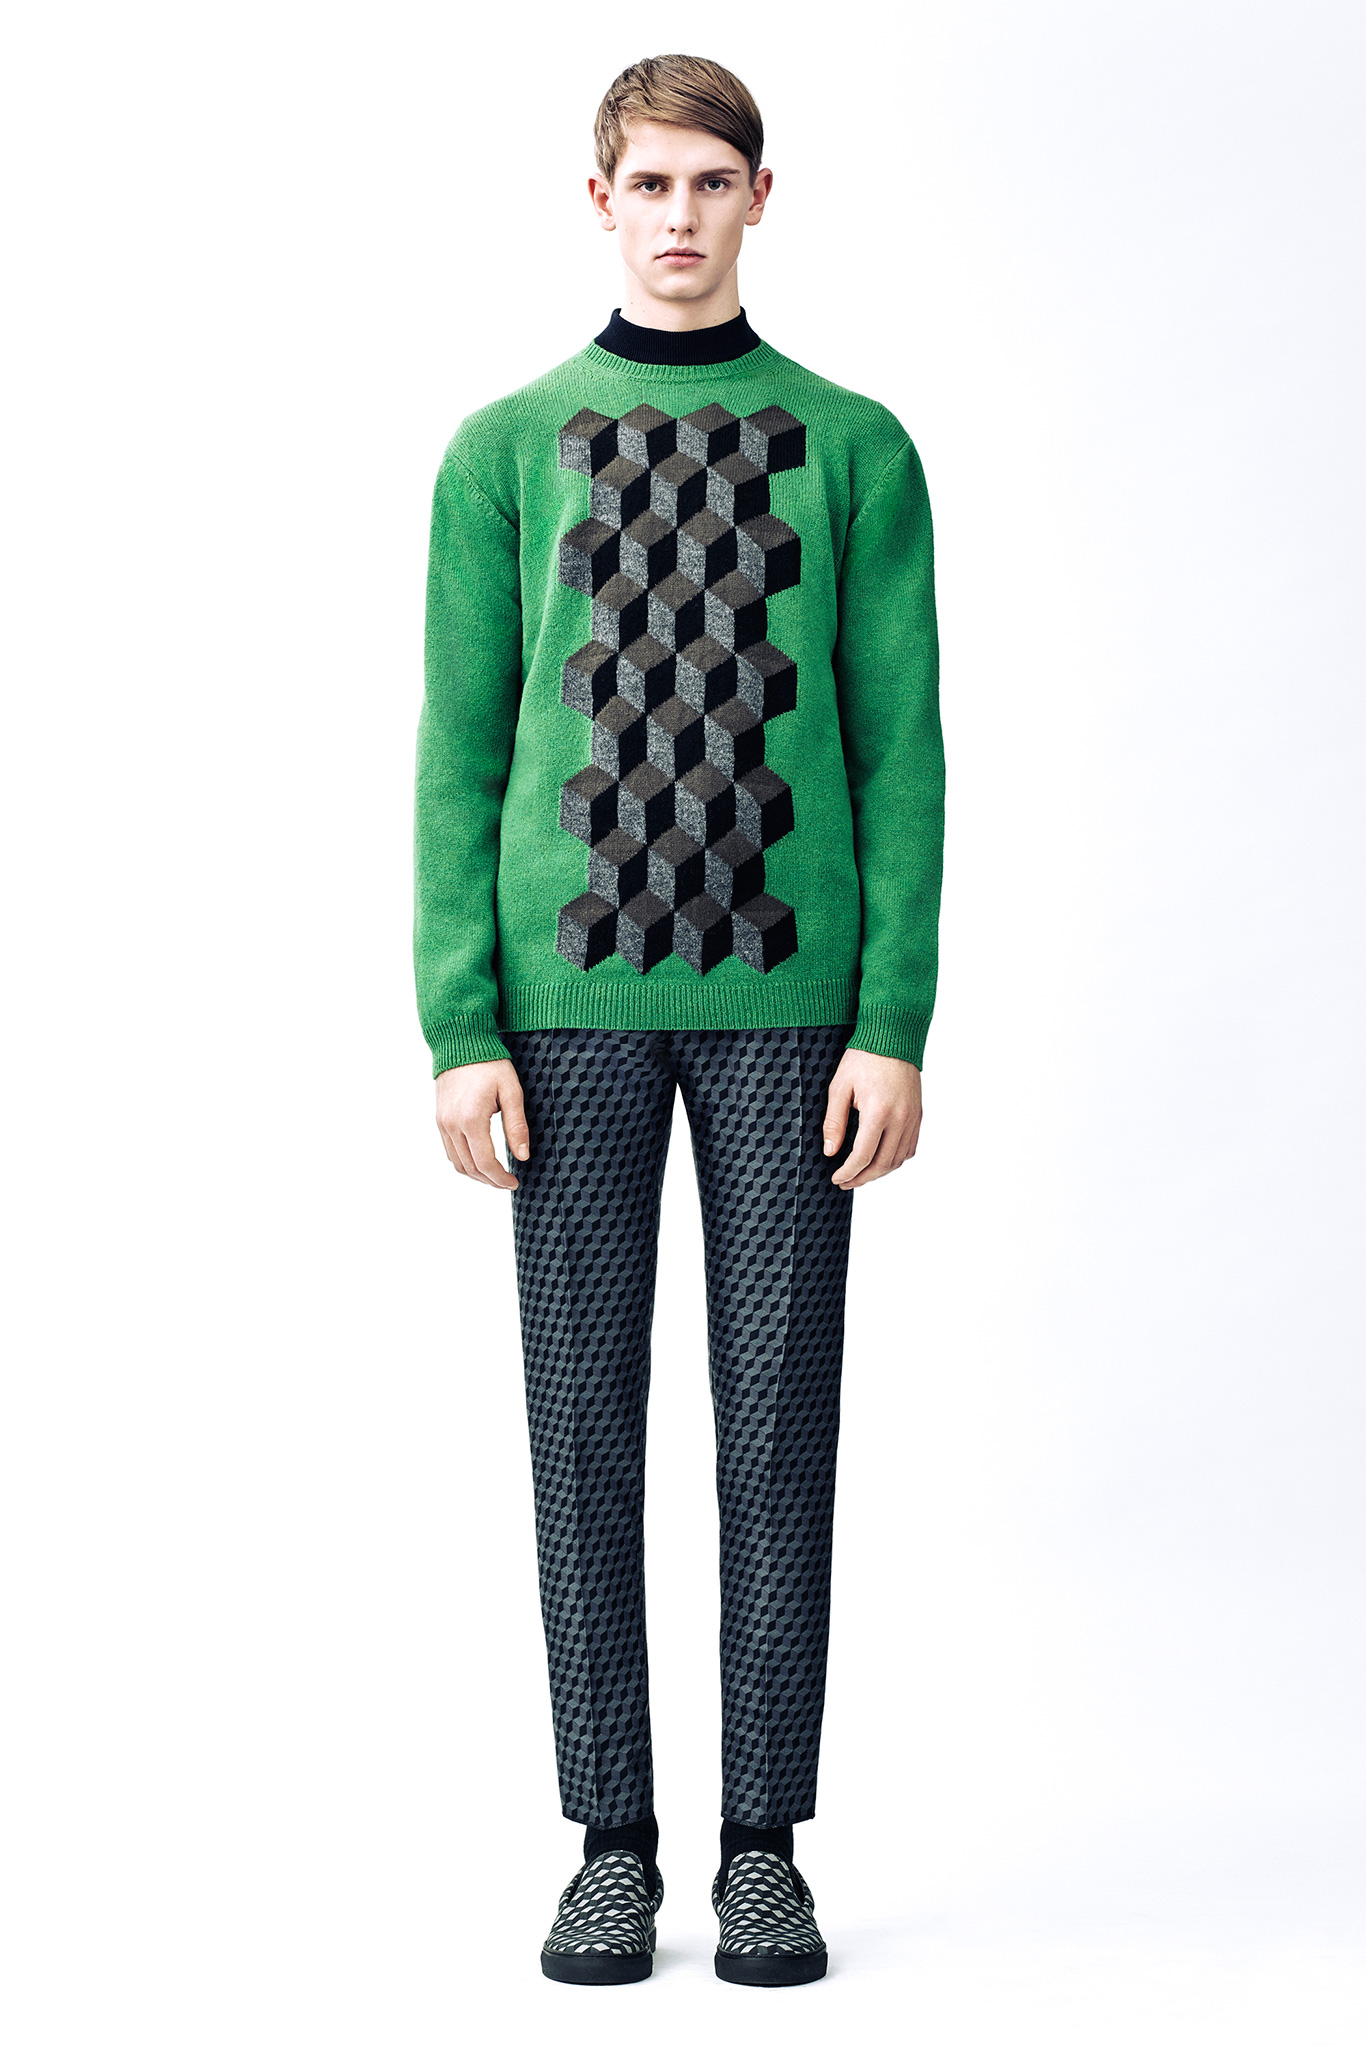 Christopher Kane Fall/Winter 2015 Collection